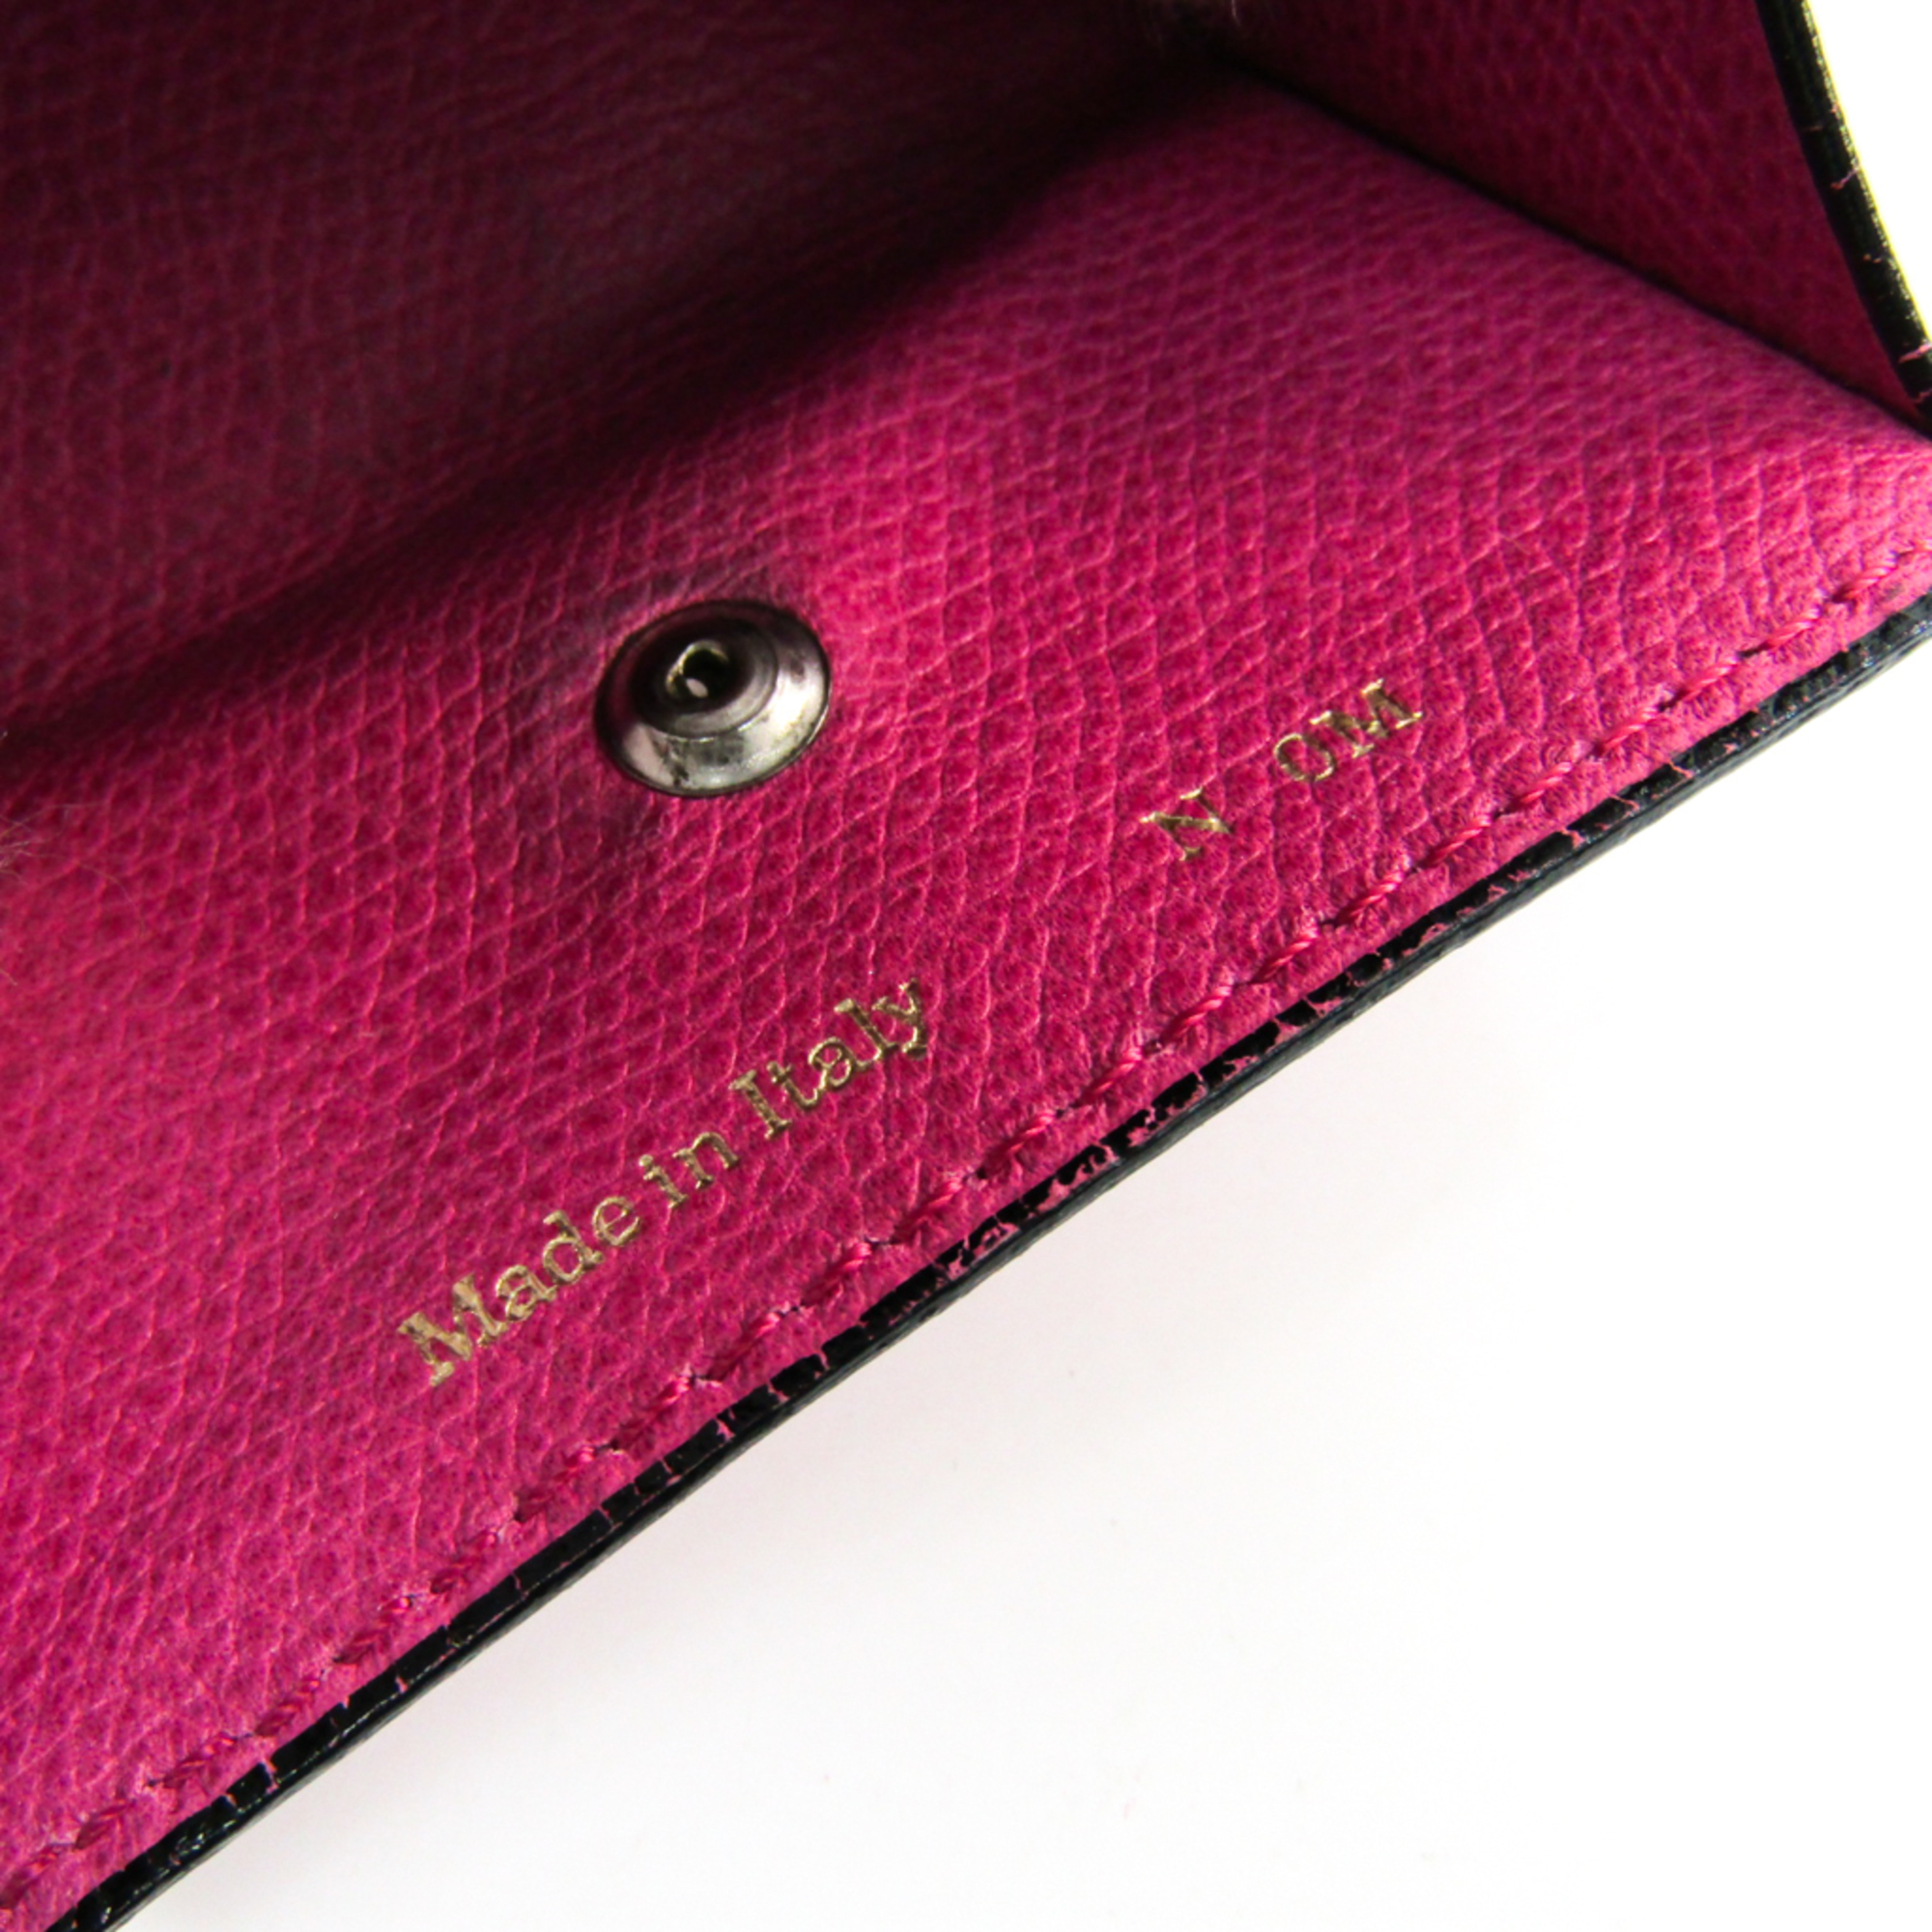 Valextra V0L90 Unisex Leather Coin Purse/coin Case Magenta